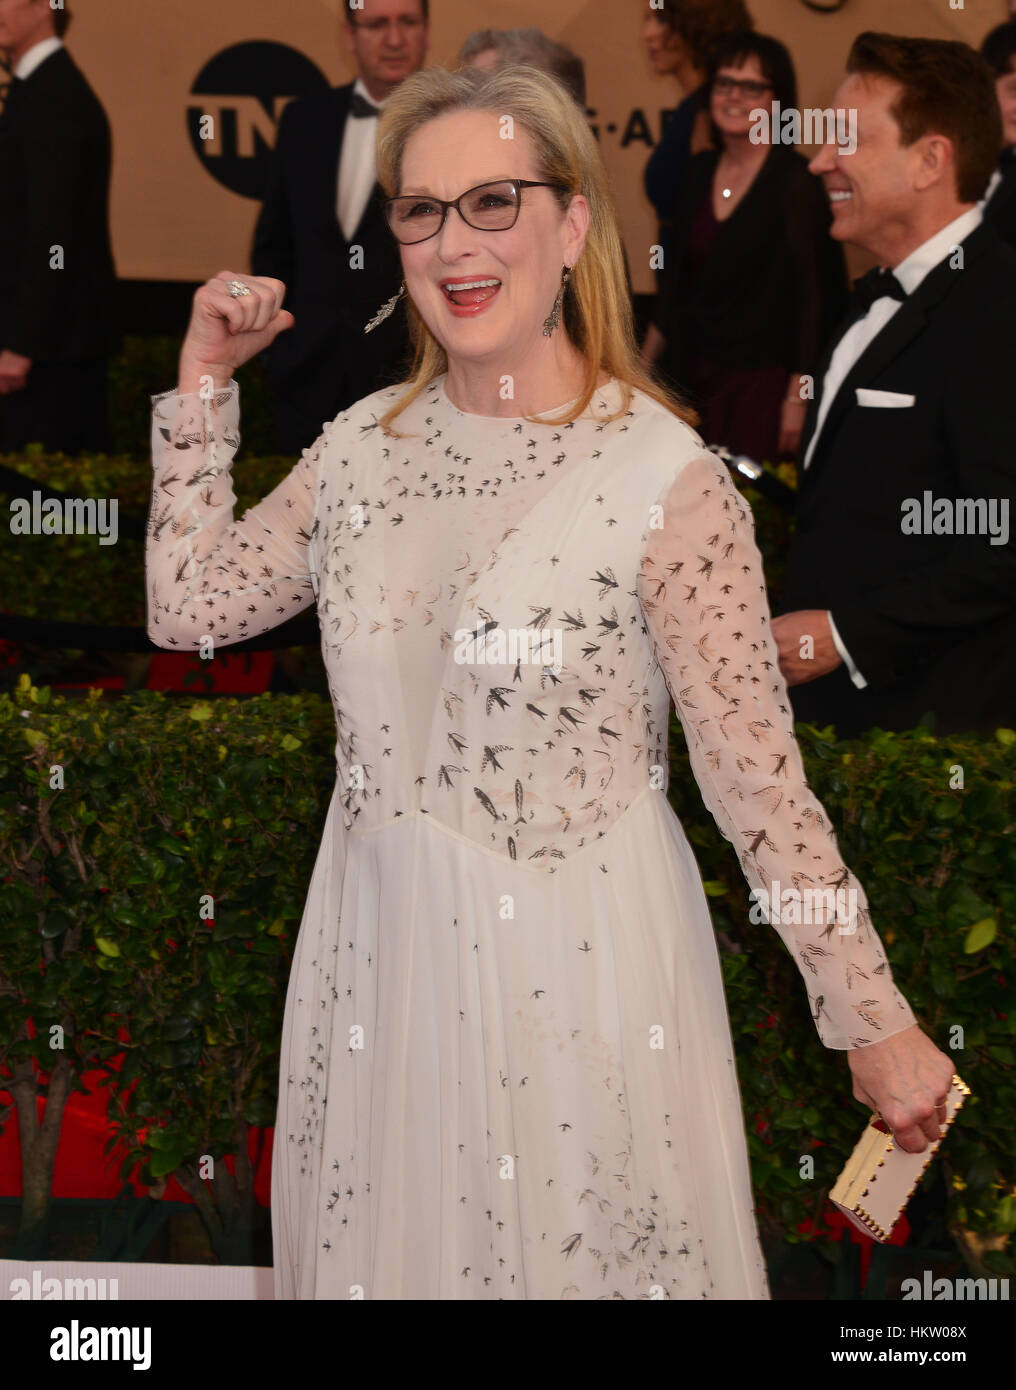 Los Angeles, USA. 29th Jan, 2017. Meryl Street 0144 arriving at the 23rd Annual Screen Actor Awards 2017 at the Shrine Amphitheater in Los Angeles. January 29, 2017. Credit: Gamma-USA/Alamy Live News Stock Photo